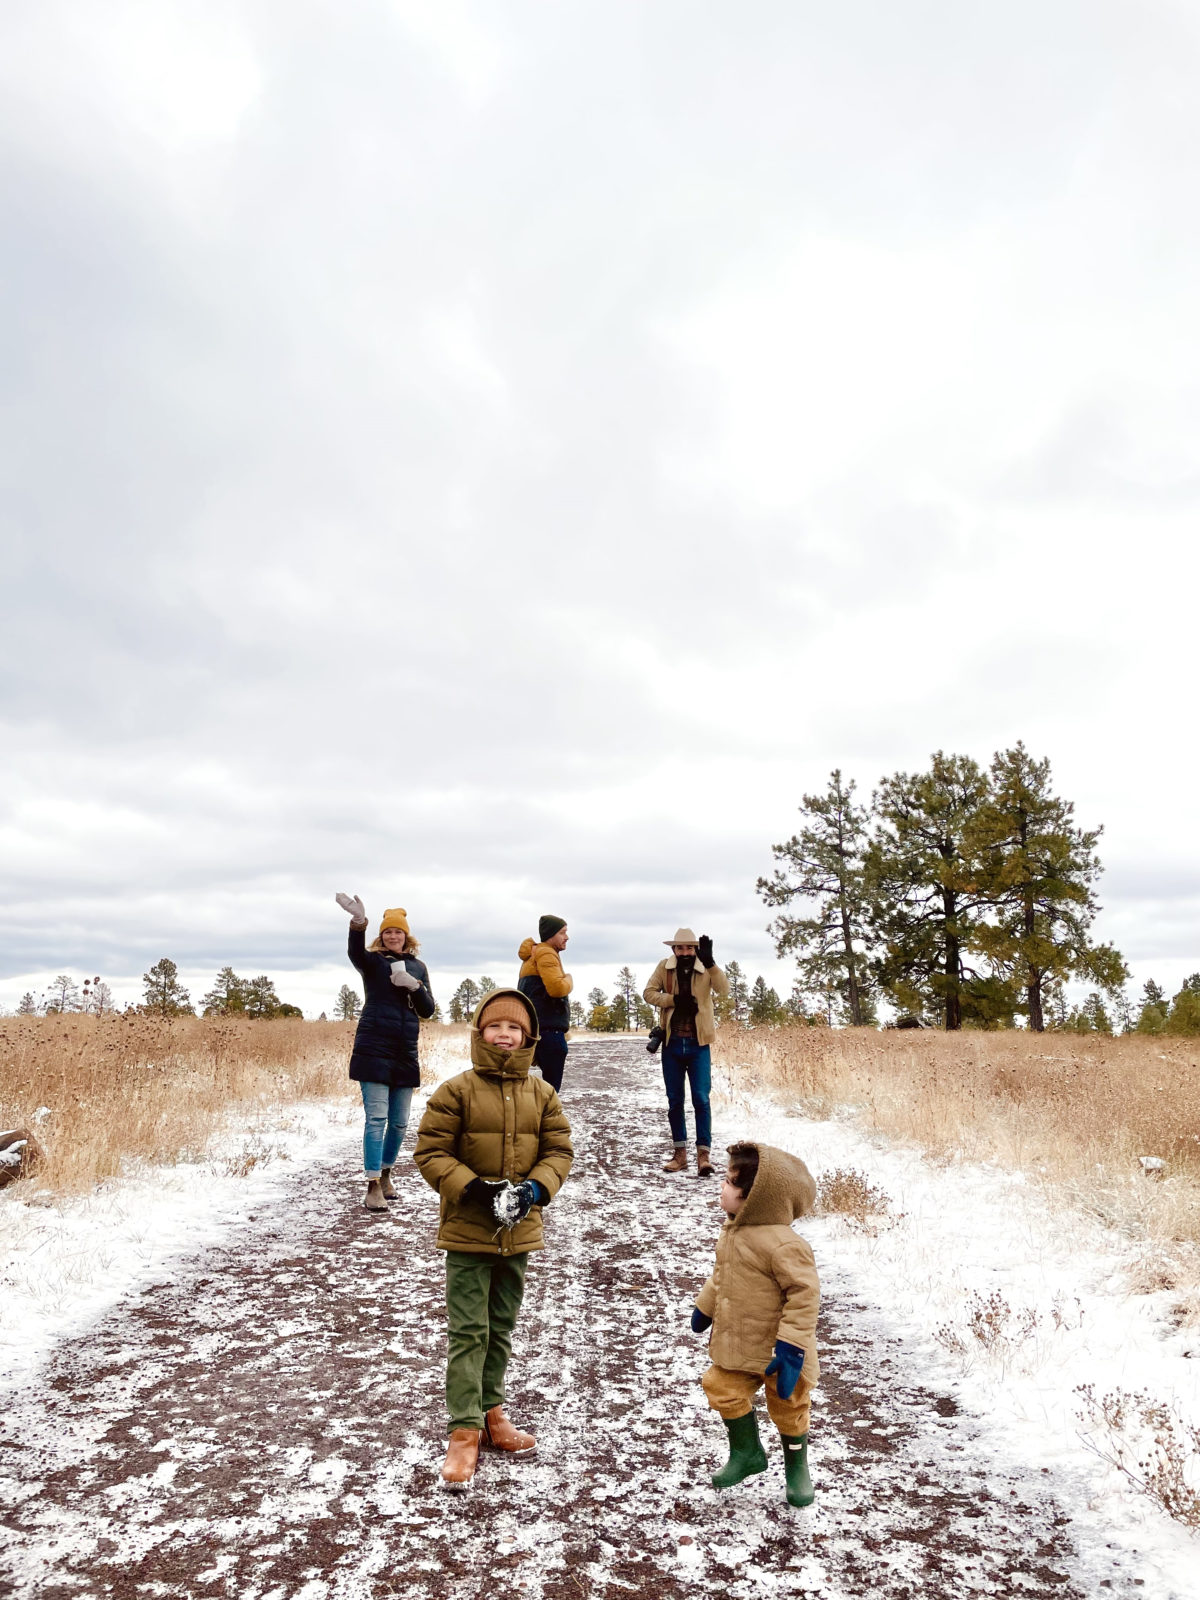 Snow Day in Flagstaff + Winter Coats for the Whole Family